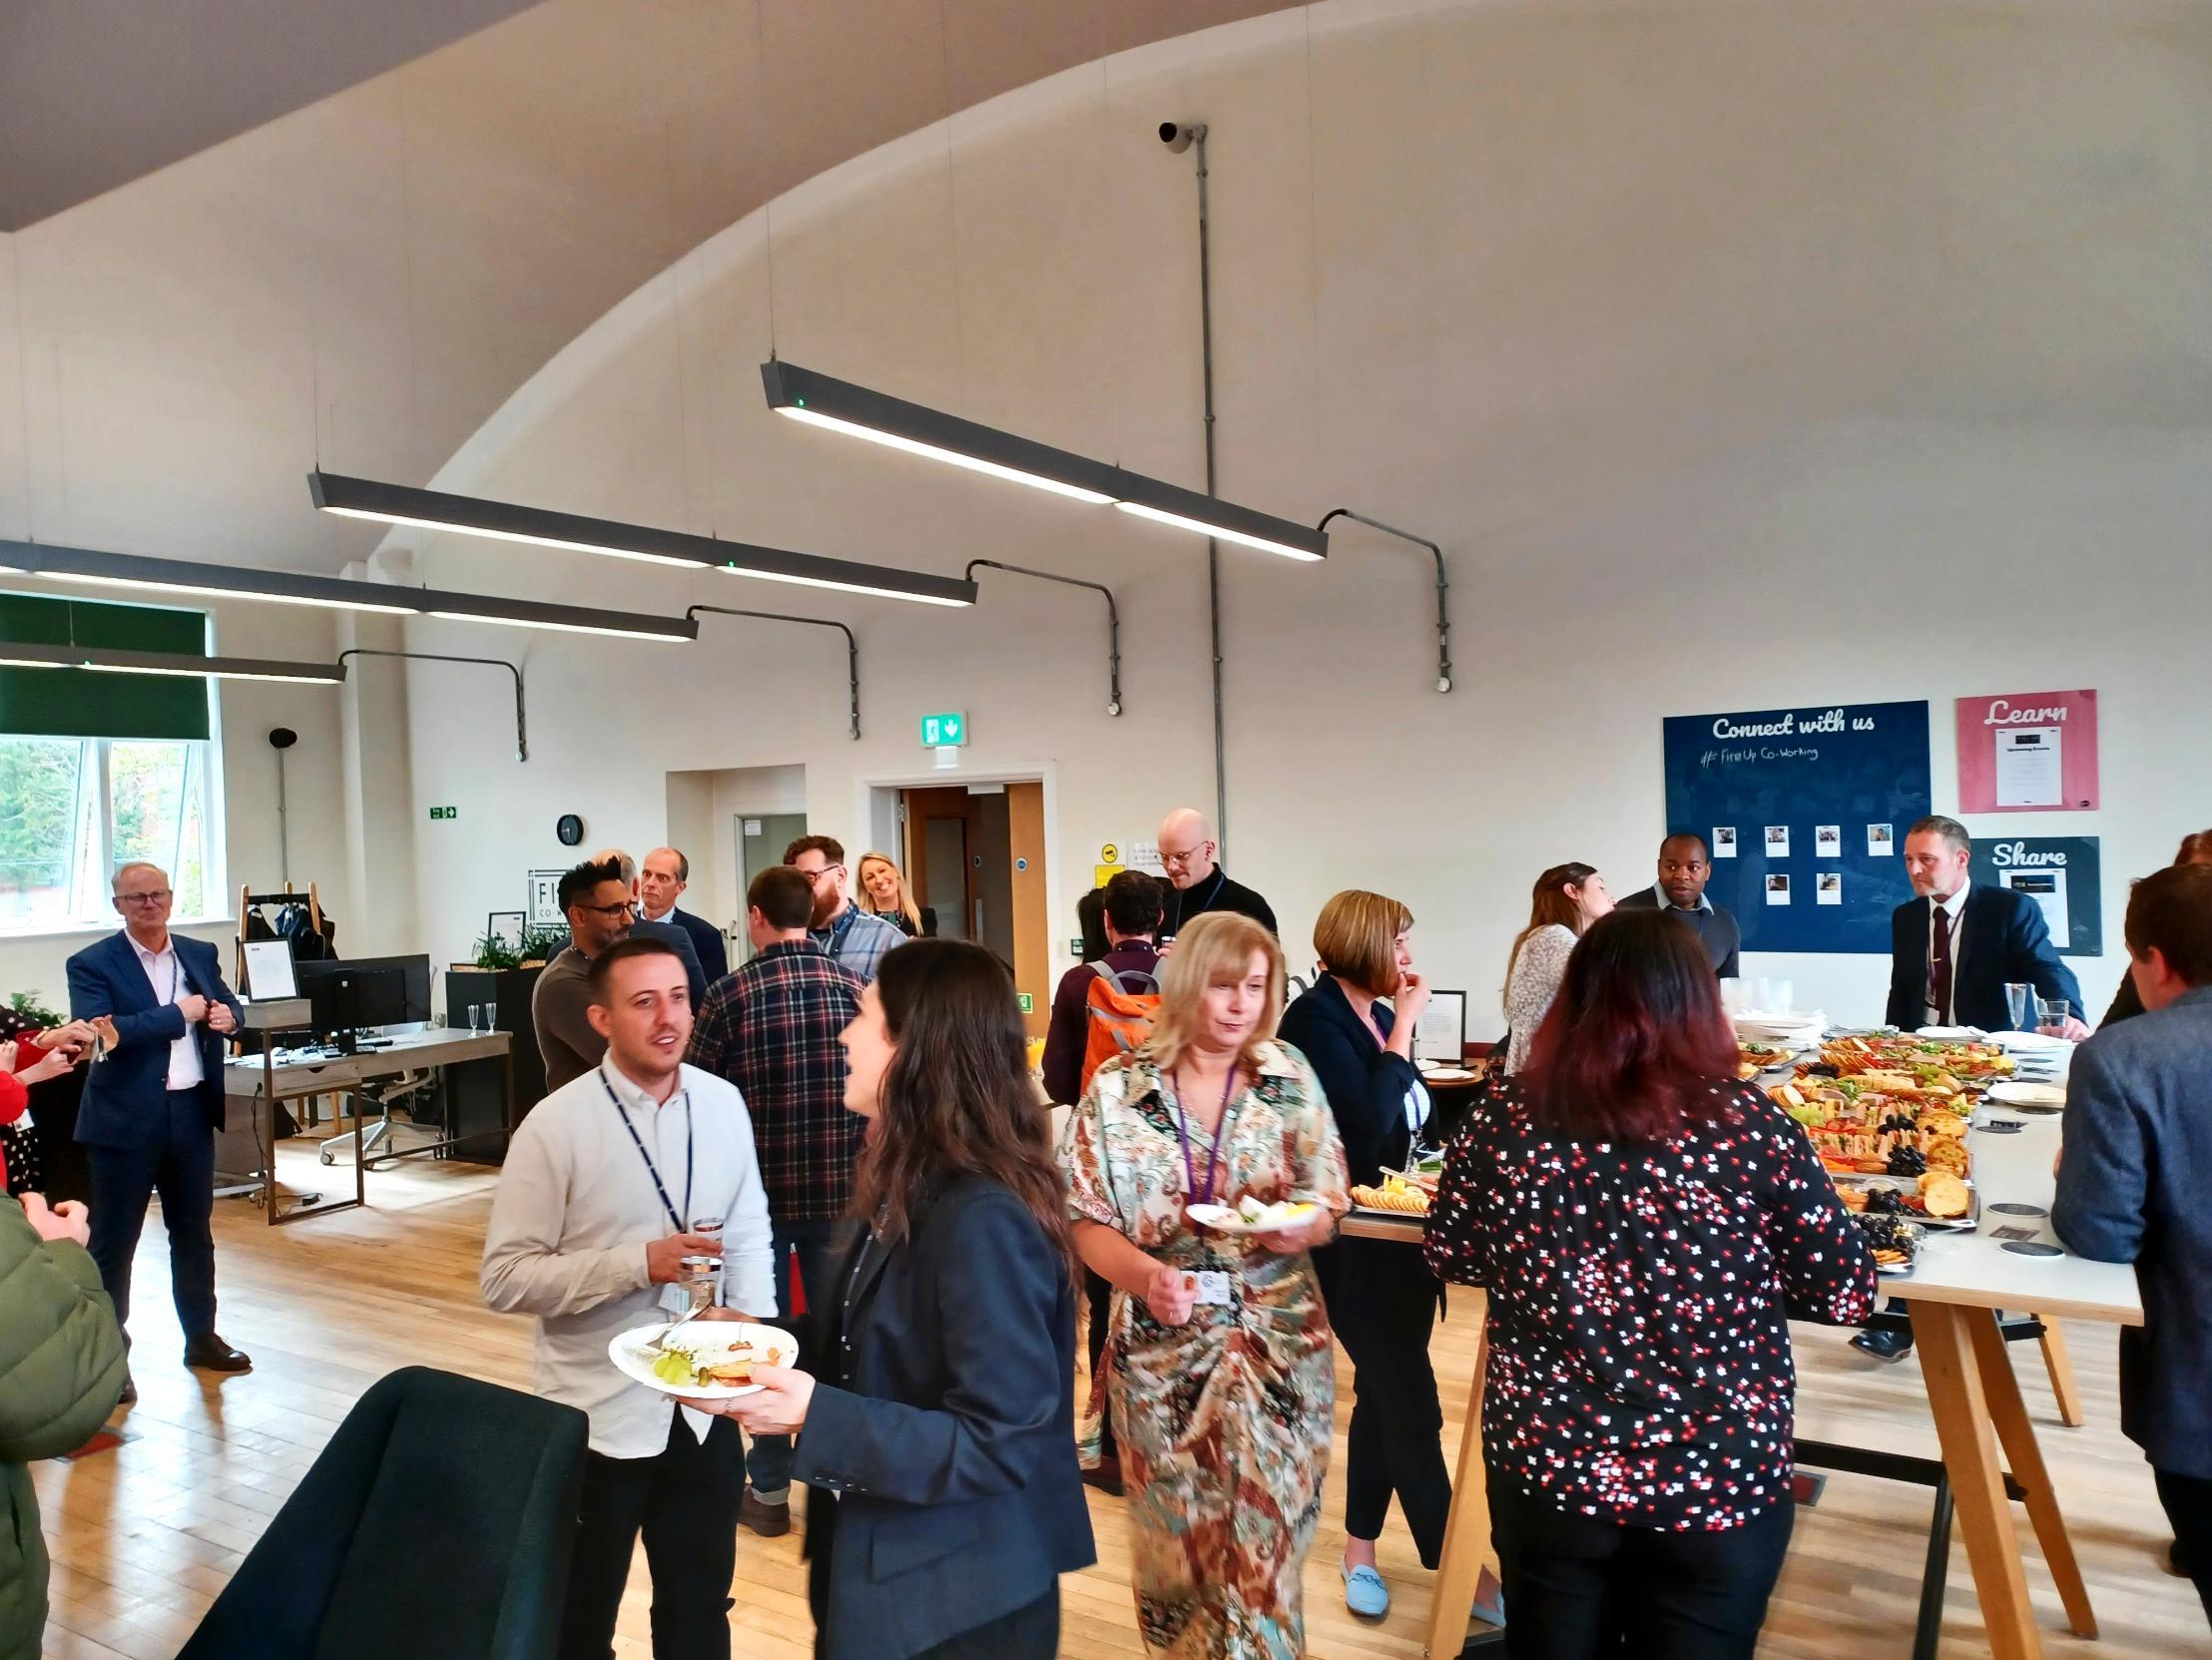 How Co-working Spaces Can Provide an Energising and Inspiring Environment for Corporate Away Days